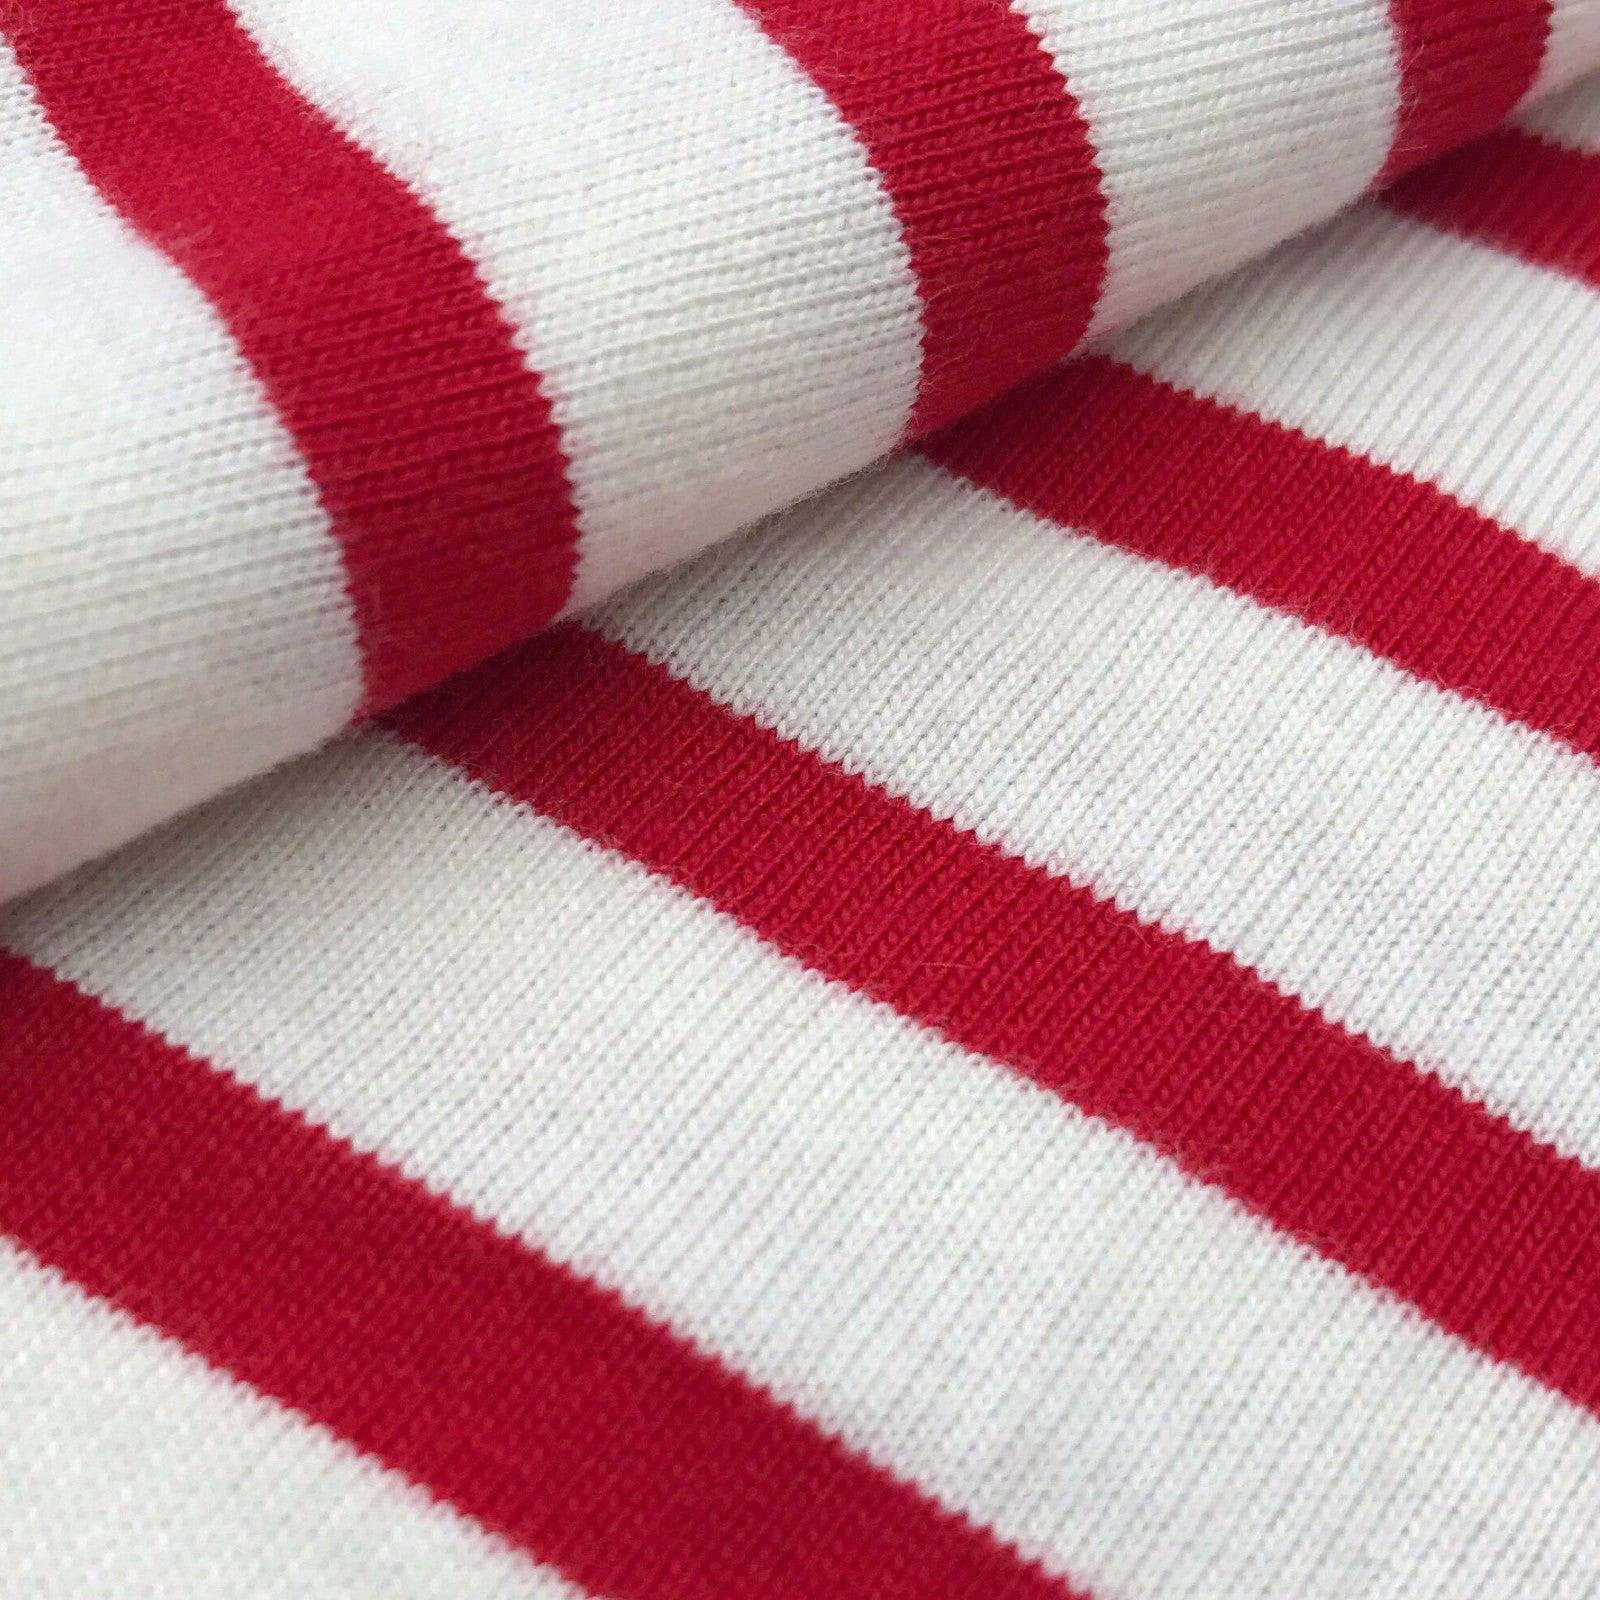 red and white striped jersey